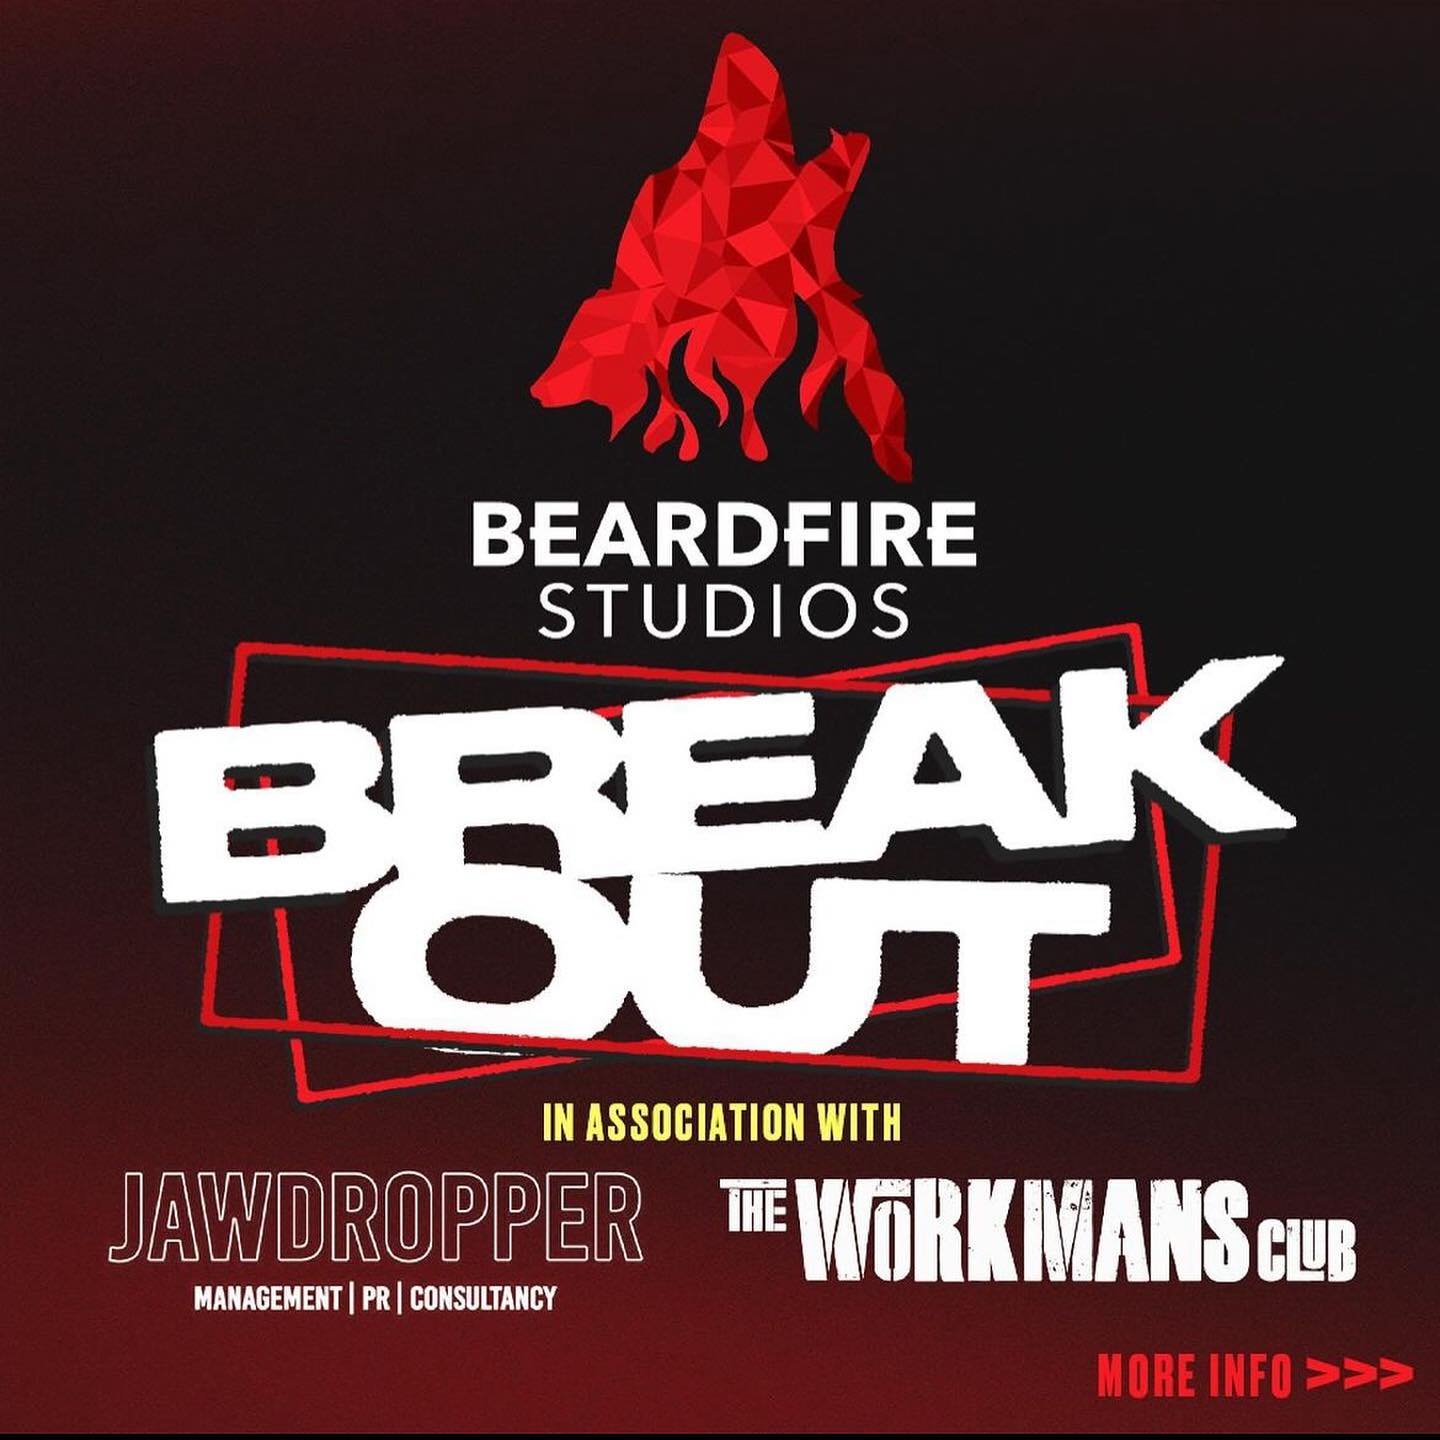 We&rsquo;re delighted to be supporting @beardfiremusic on this fantastic opportunity for an Irish artist to win a free single recording, full PR campaign and live show at @workmansclub, worth over &euro;2k 🤯

Entry details on the attached graphics, 